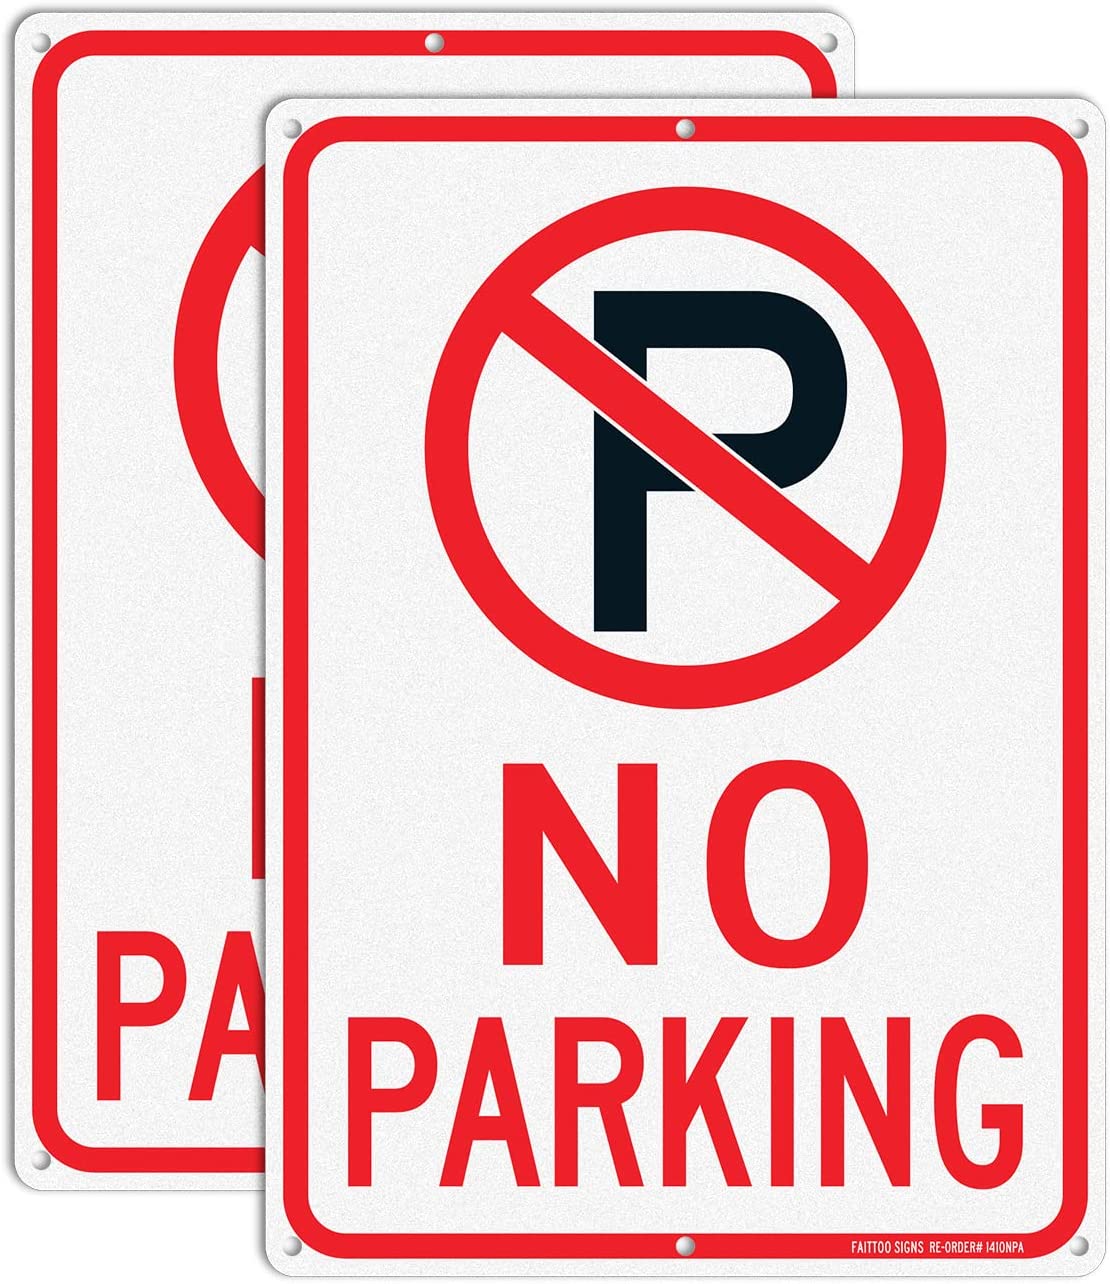 No Parking Sign With Symbol Sign, 14 x 10 Inches Reflective .40 Rust Free Aluminum, UV Protected, Weather Resistant, Waterproof, Durable Ink, Easy To Mount